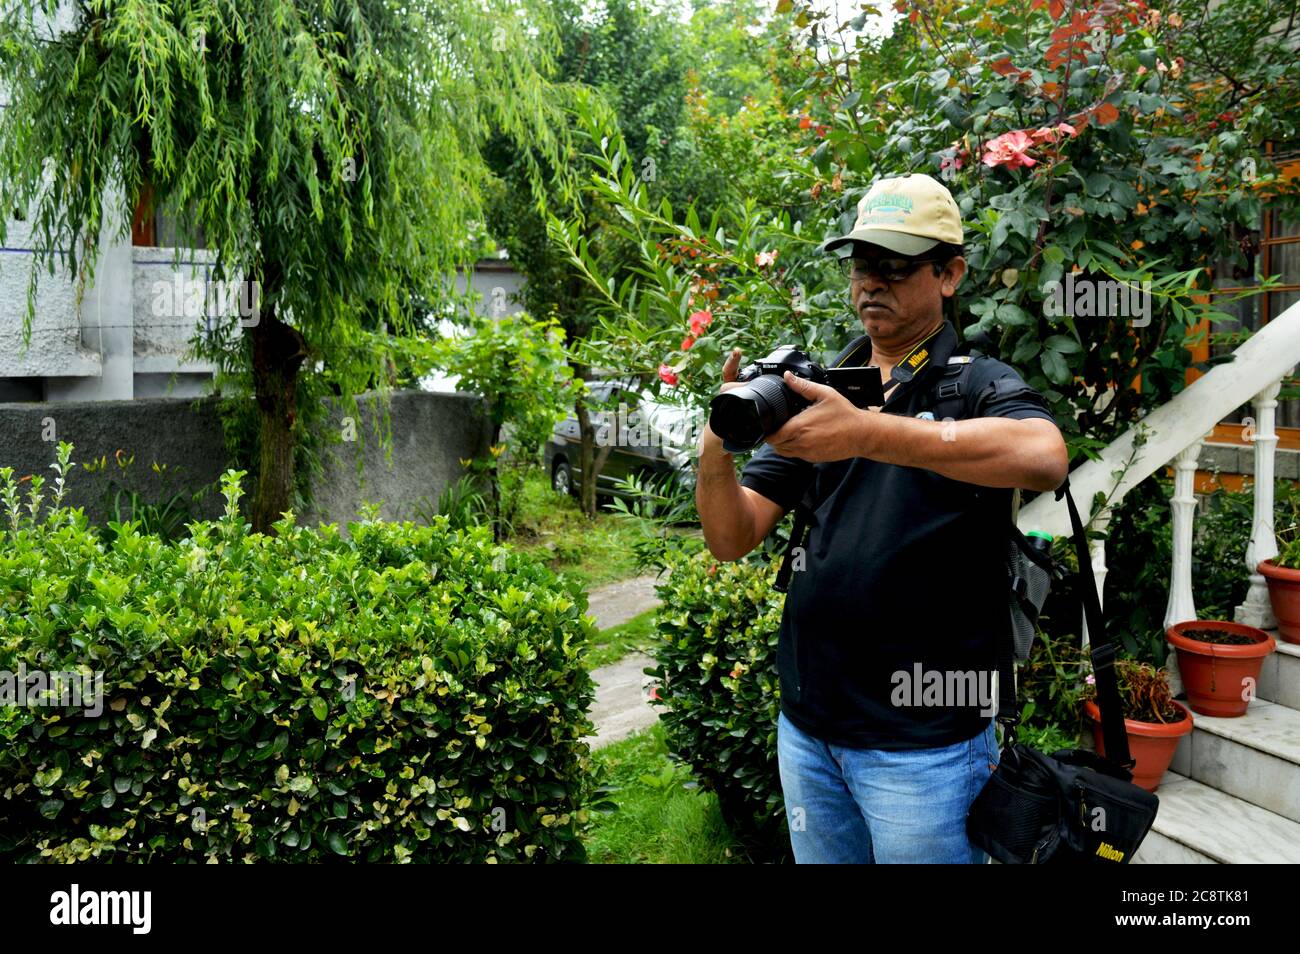 An Indian man wearing cap and glasses taking picture with camera in a garden, selective focusing Stock Photo